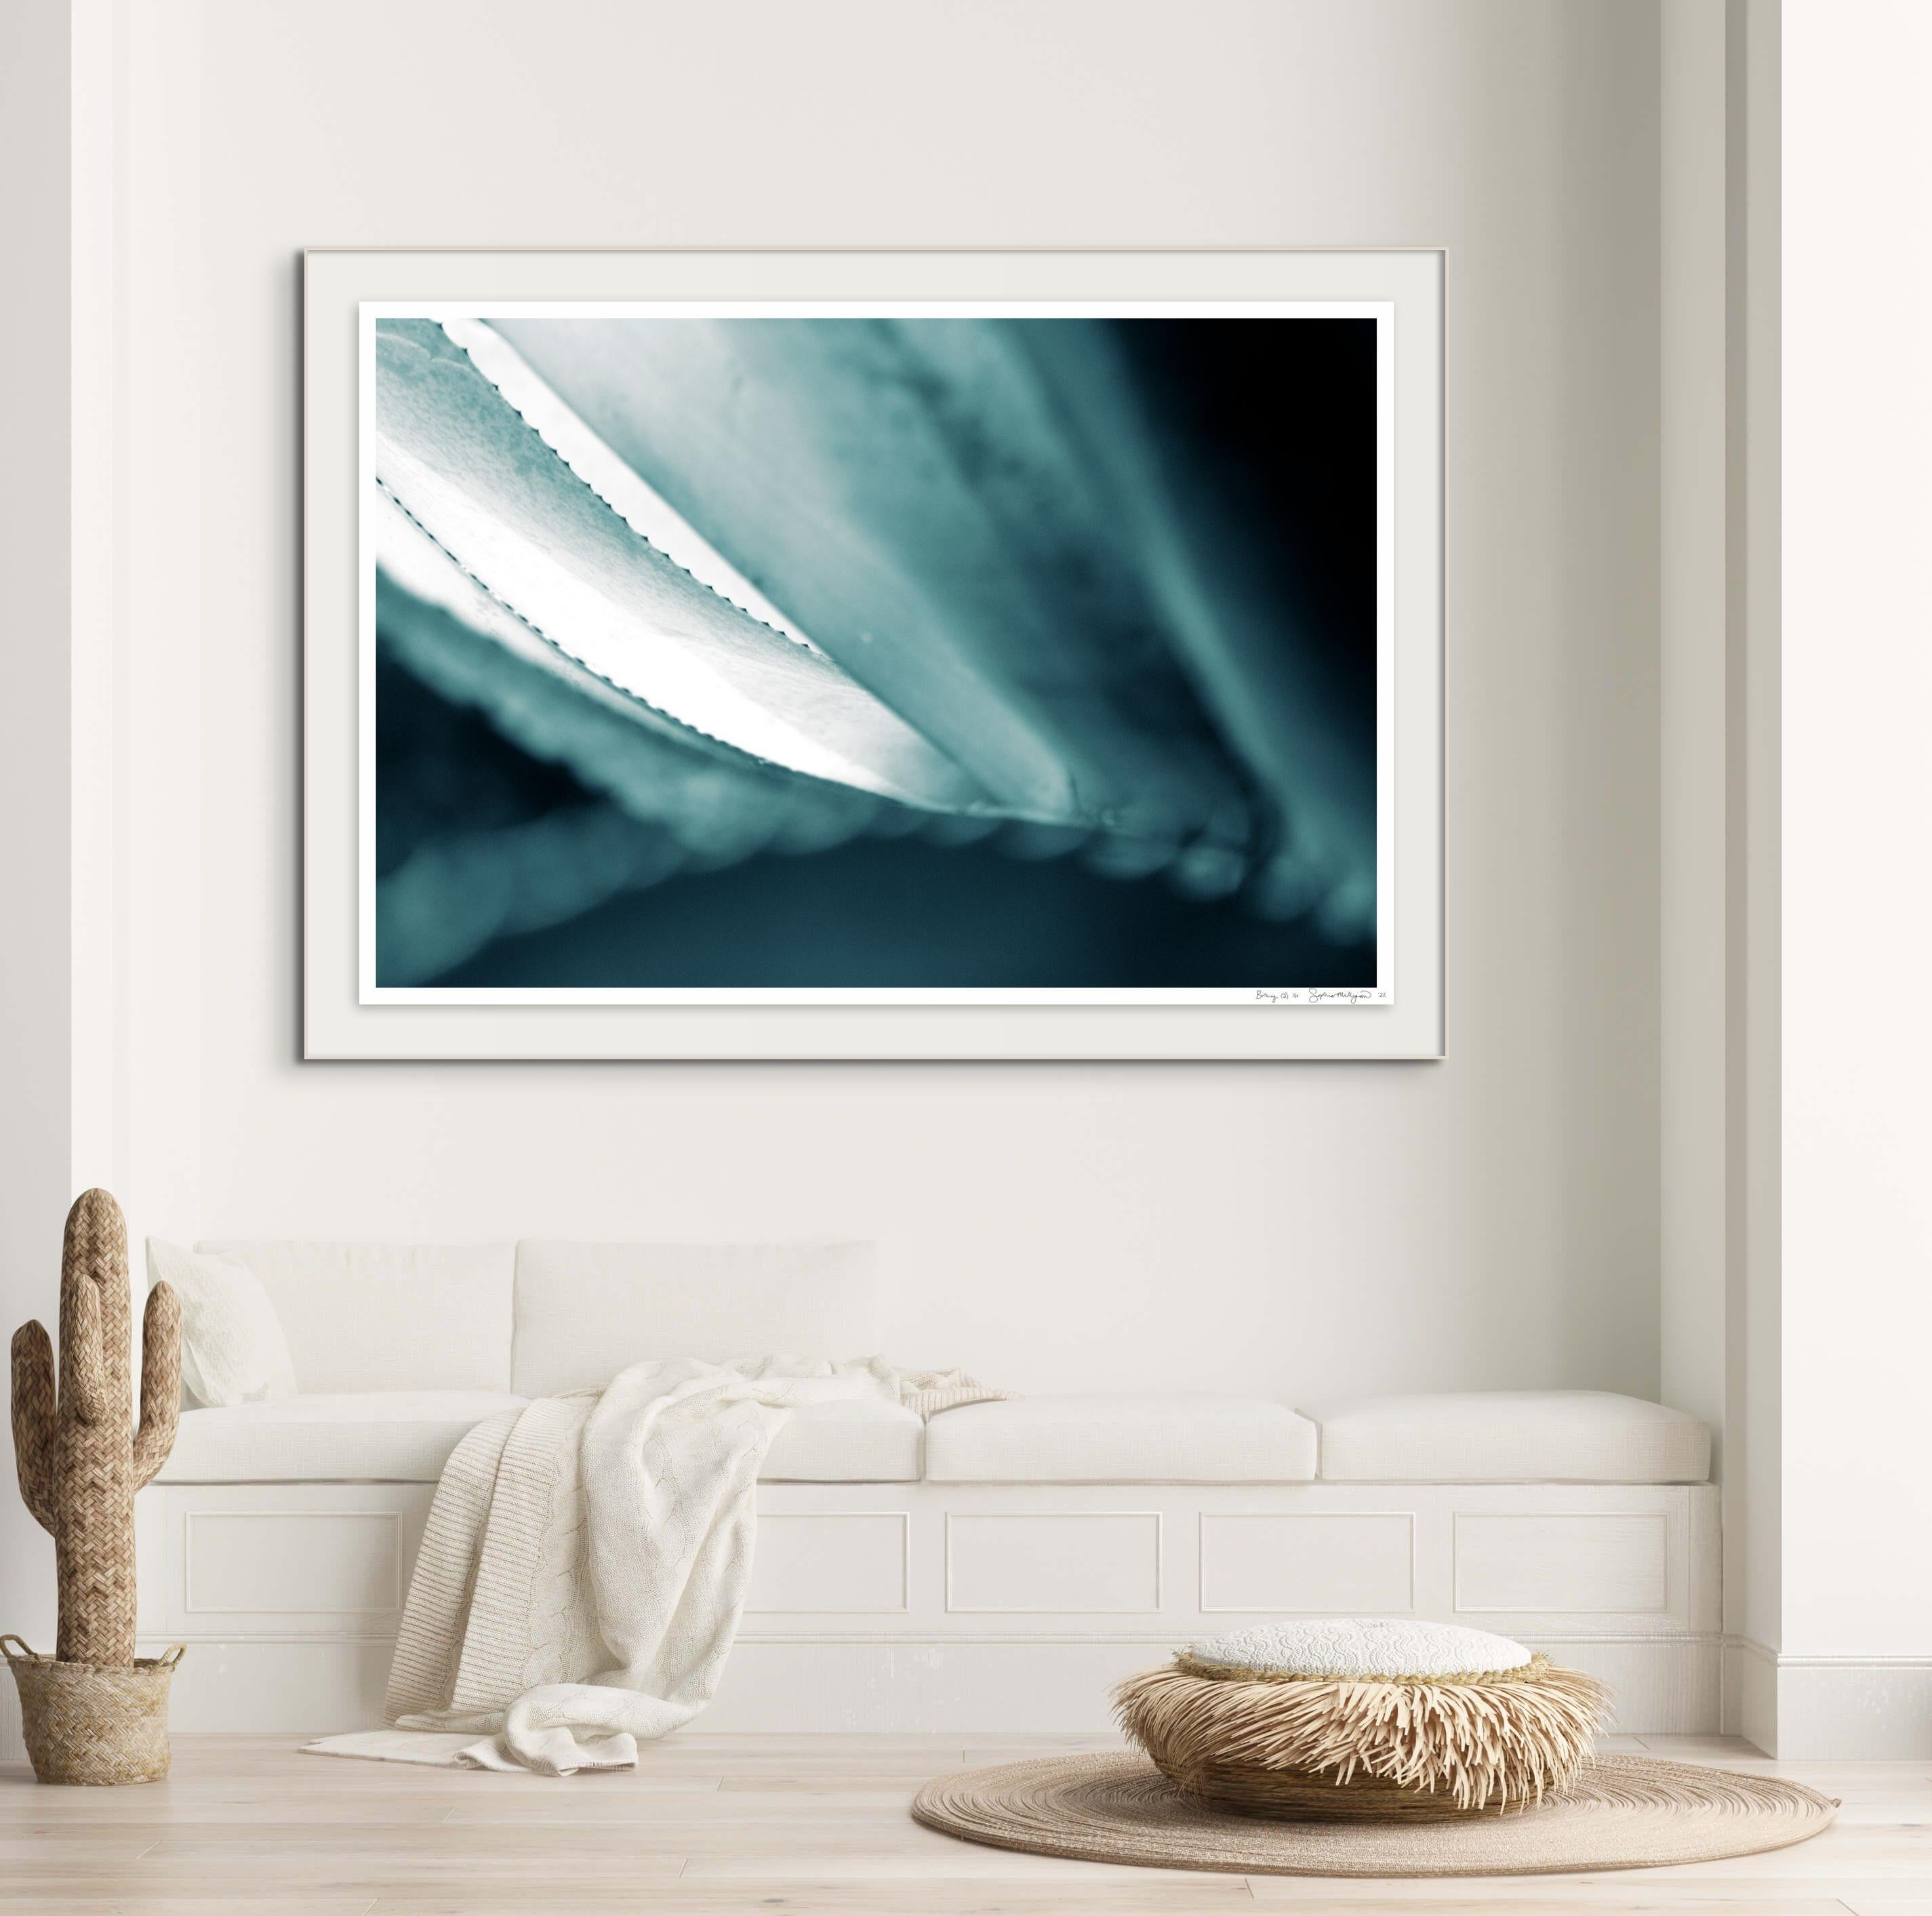 'Cicatrices 2' Large scale photo. Agave leaf, desert, tropical blue teal green  - Photograph by Sophia Milligan